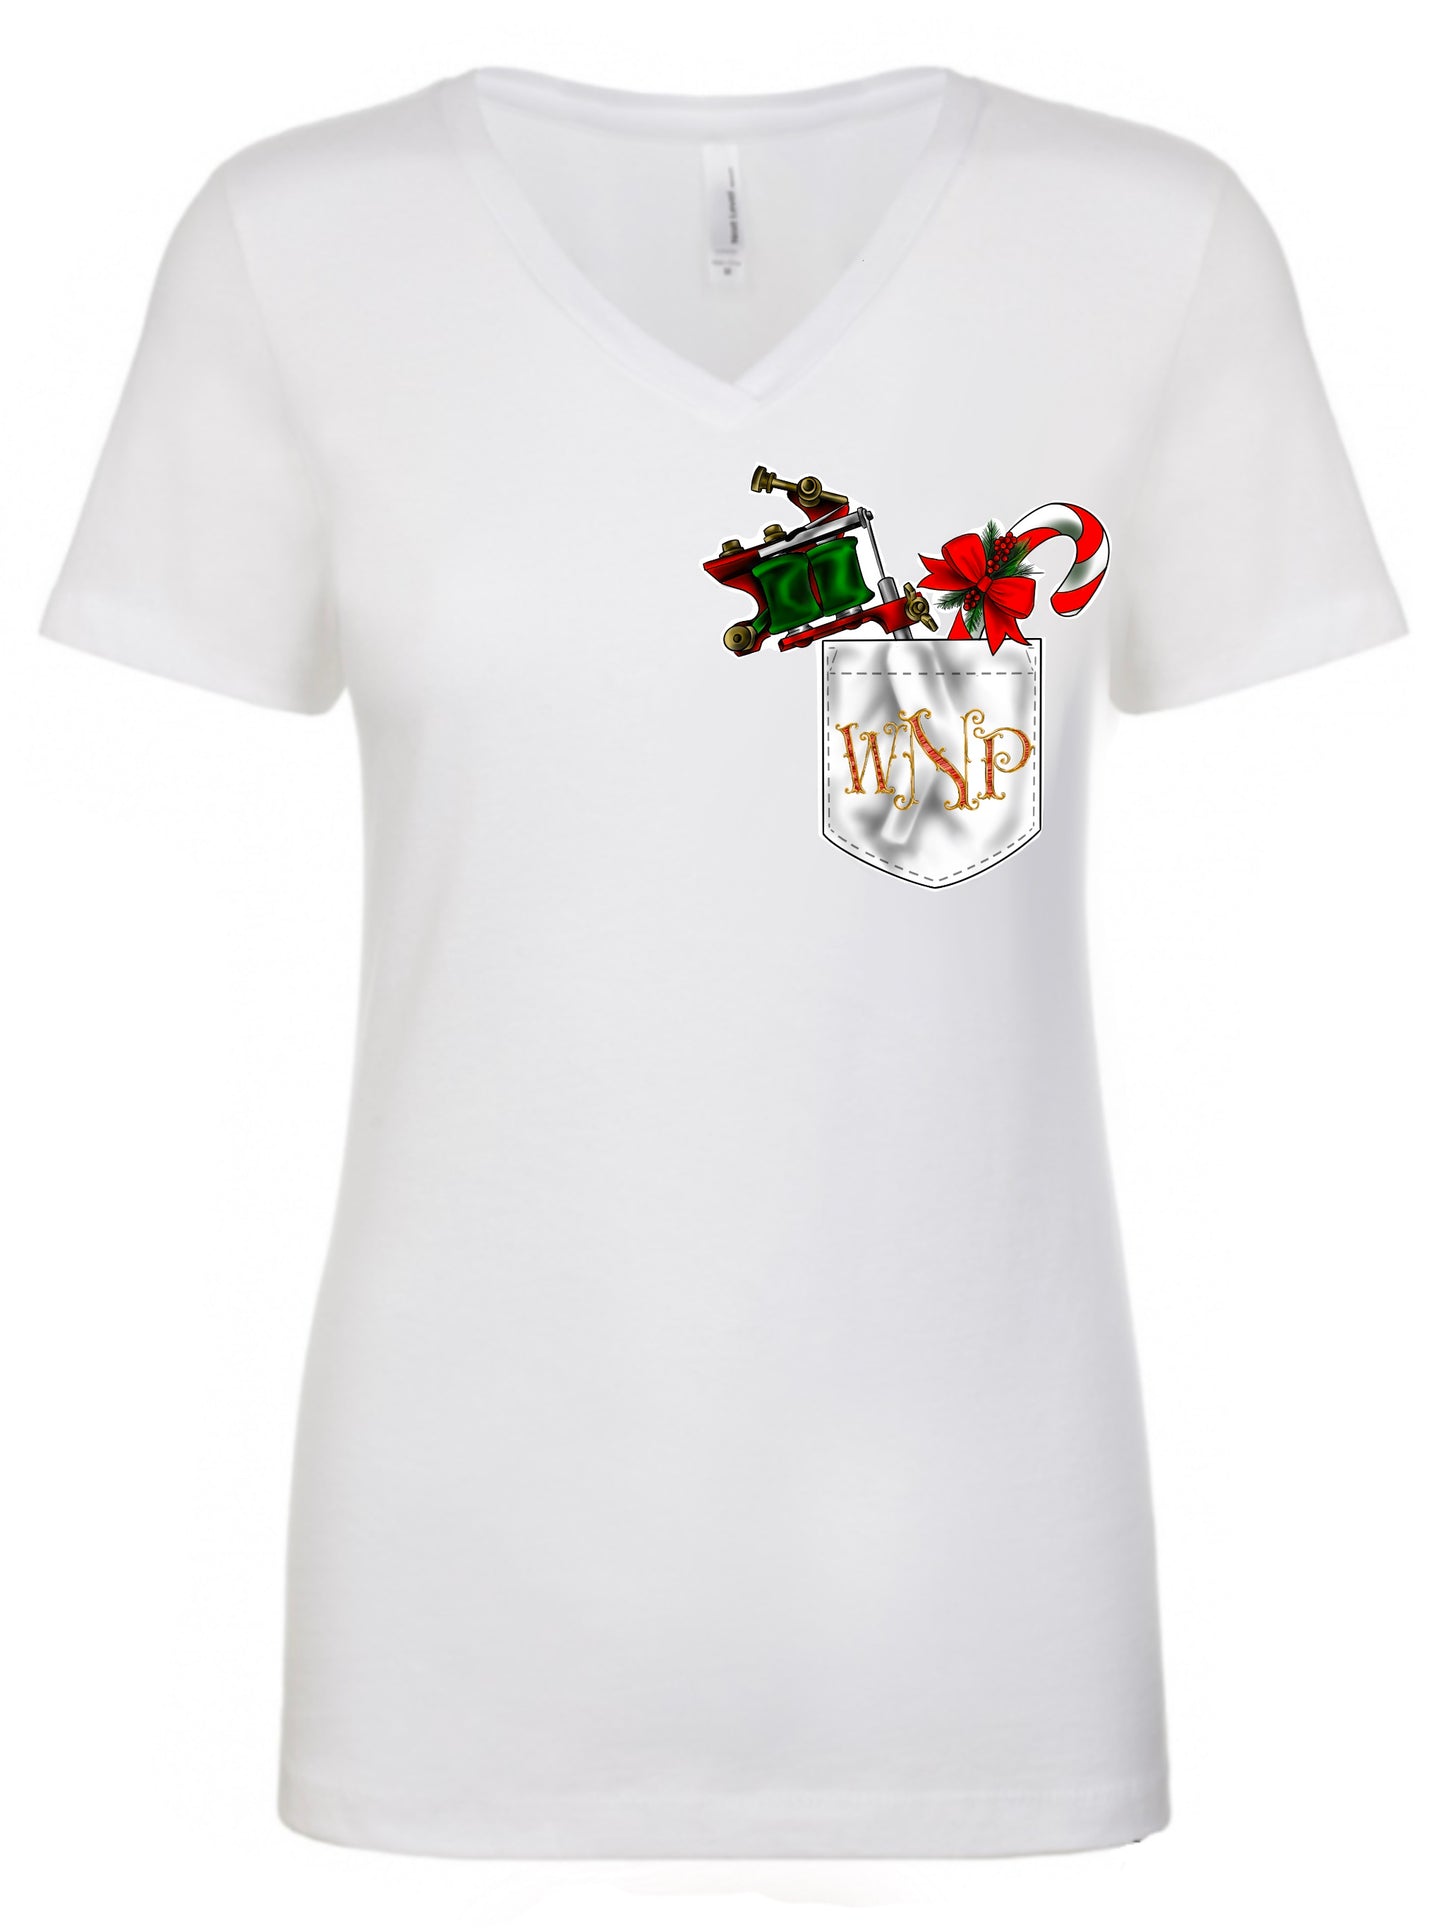 Gingah - Womans White Fitted V-neck Tee